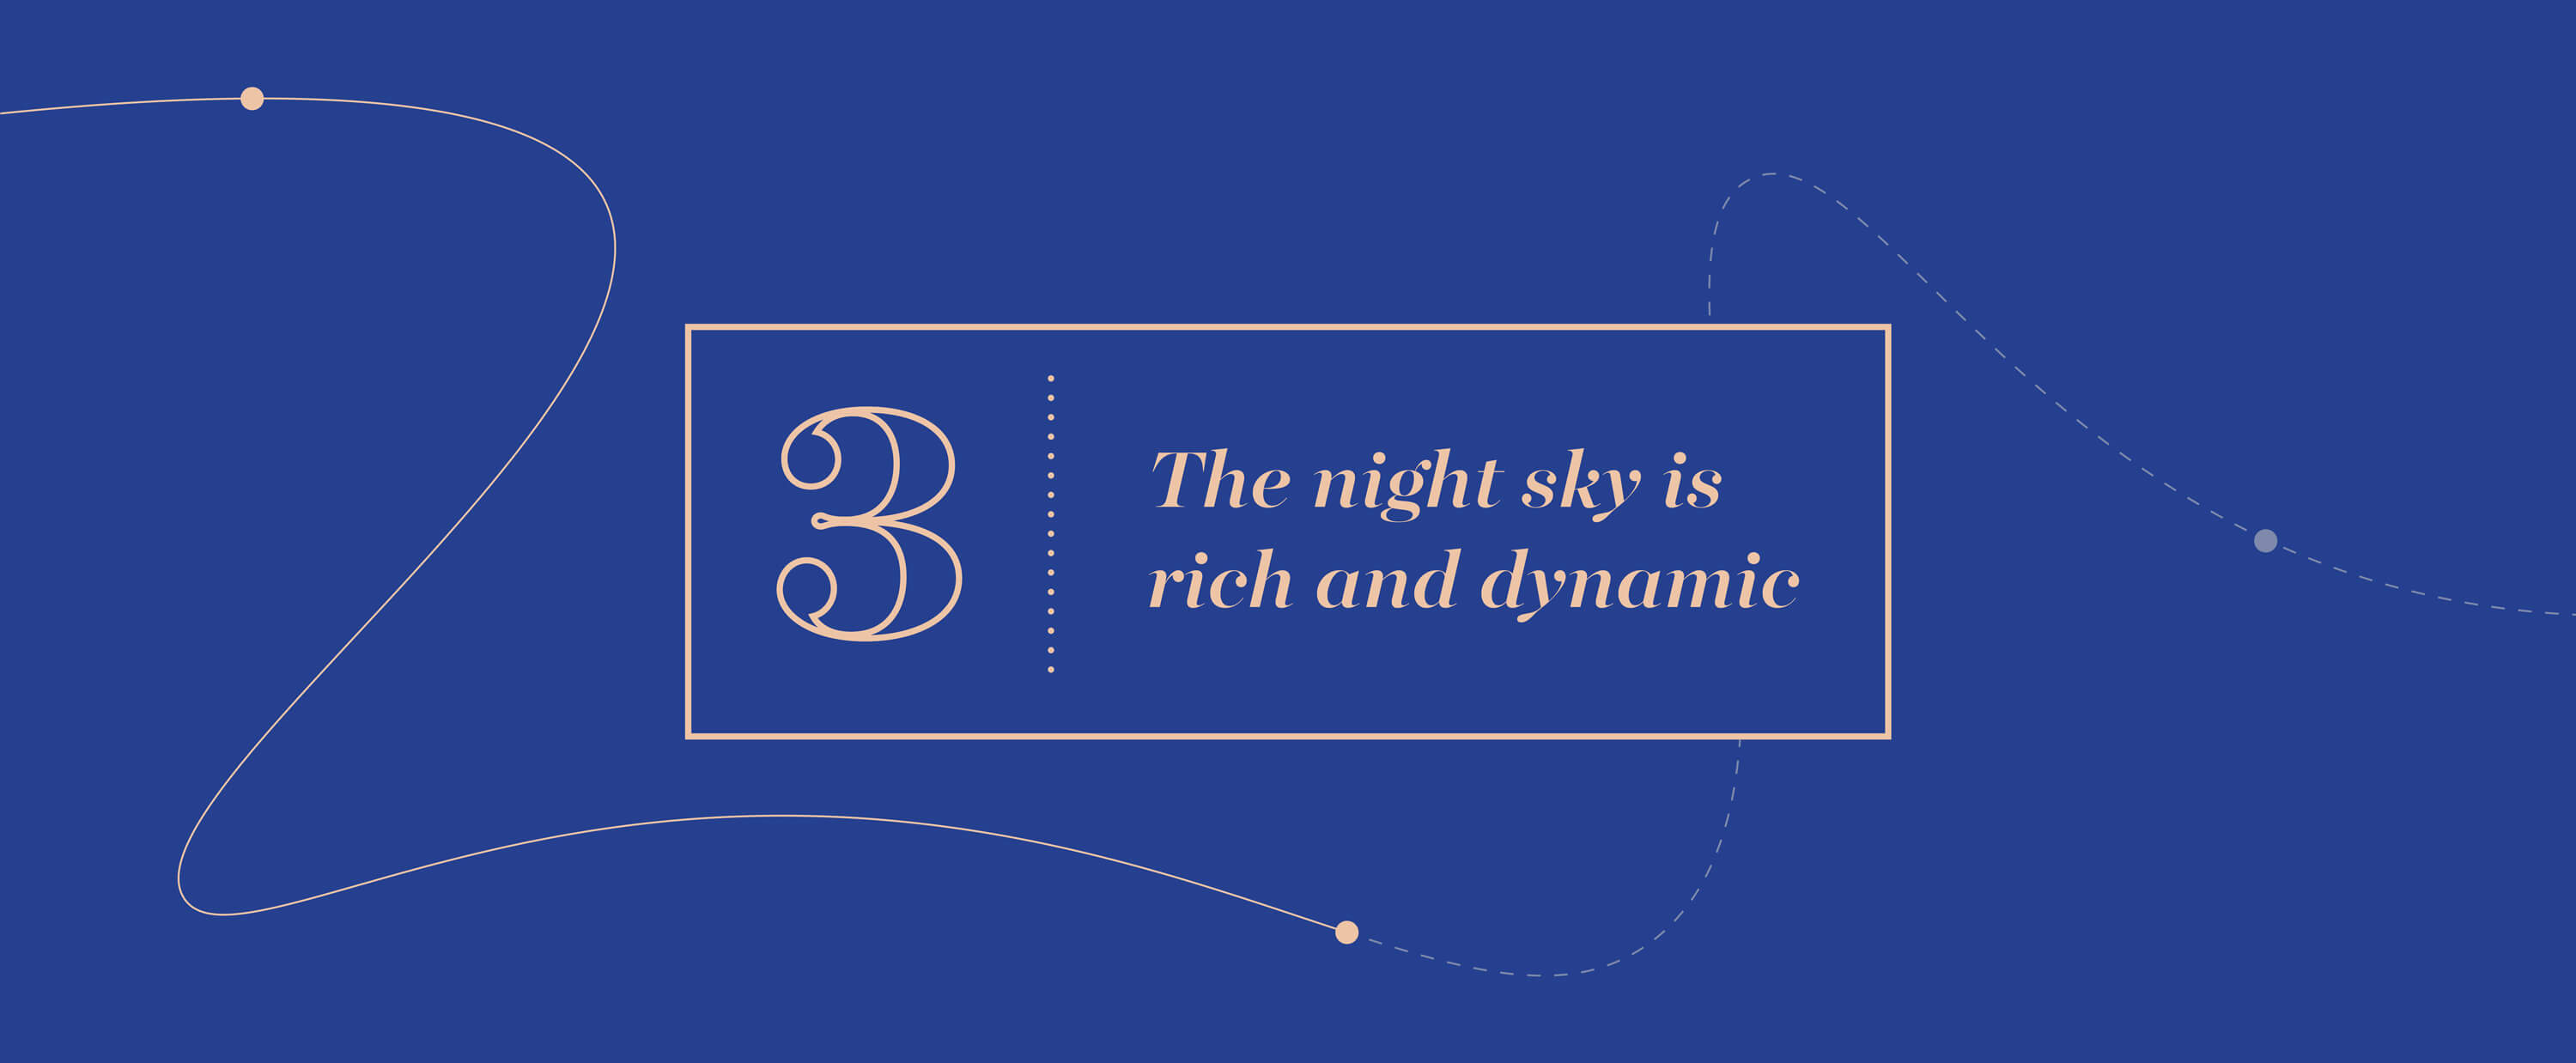 Big Idea 3 - The night sky is rich and dynamic